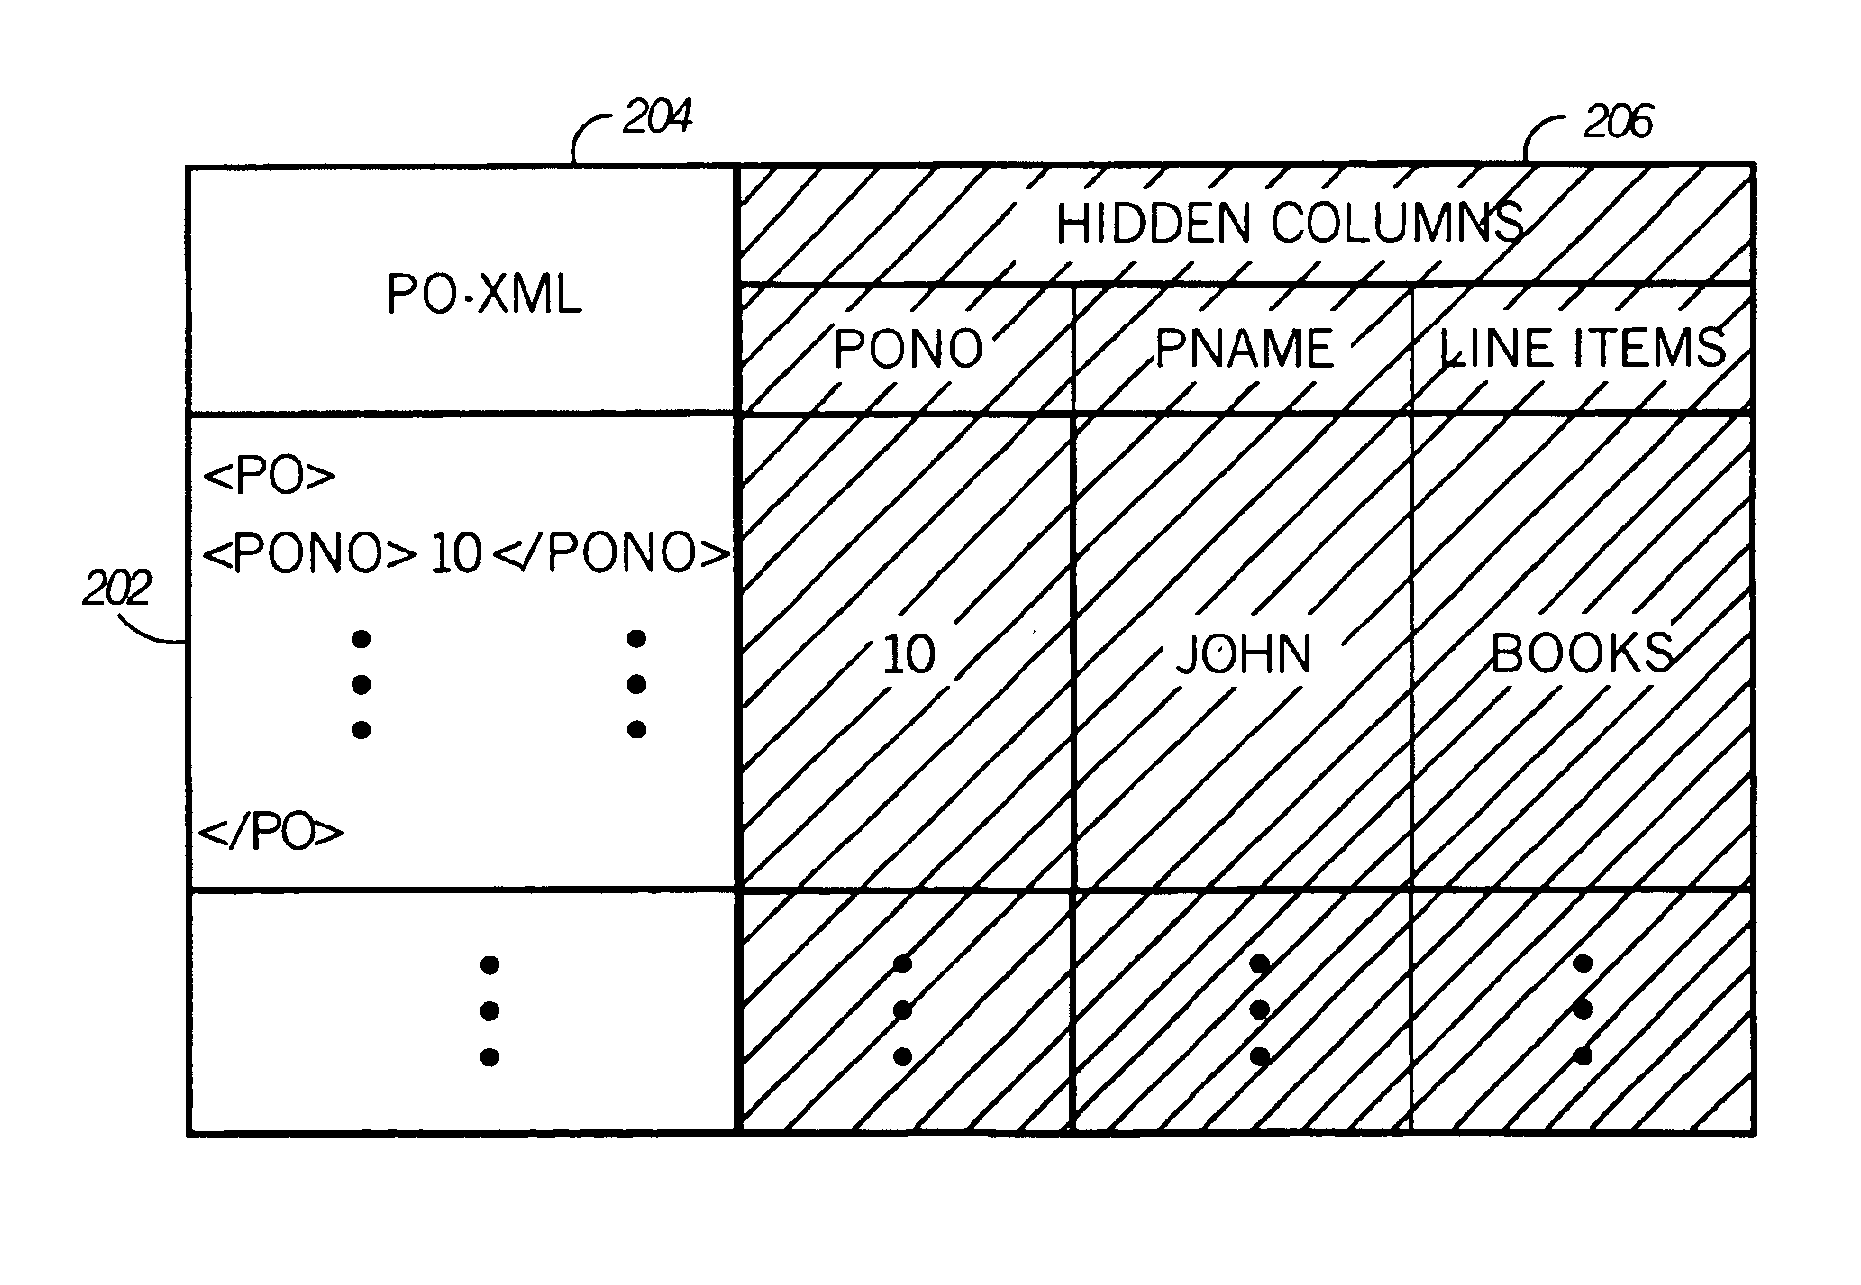 Method and apparatus for flexible storage and uniform manipulation of XML data in a relational database system